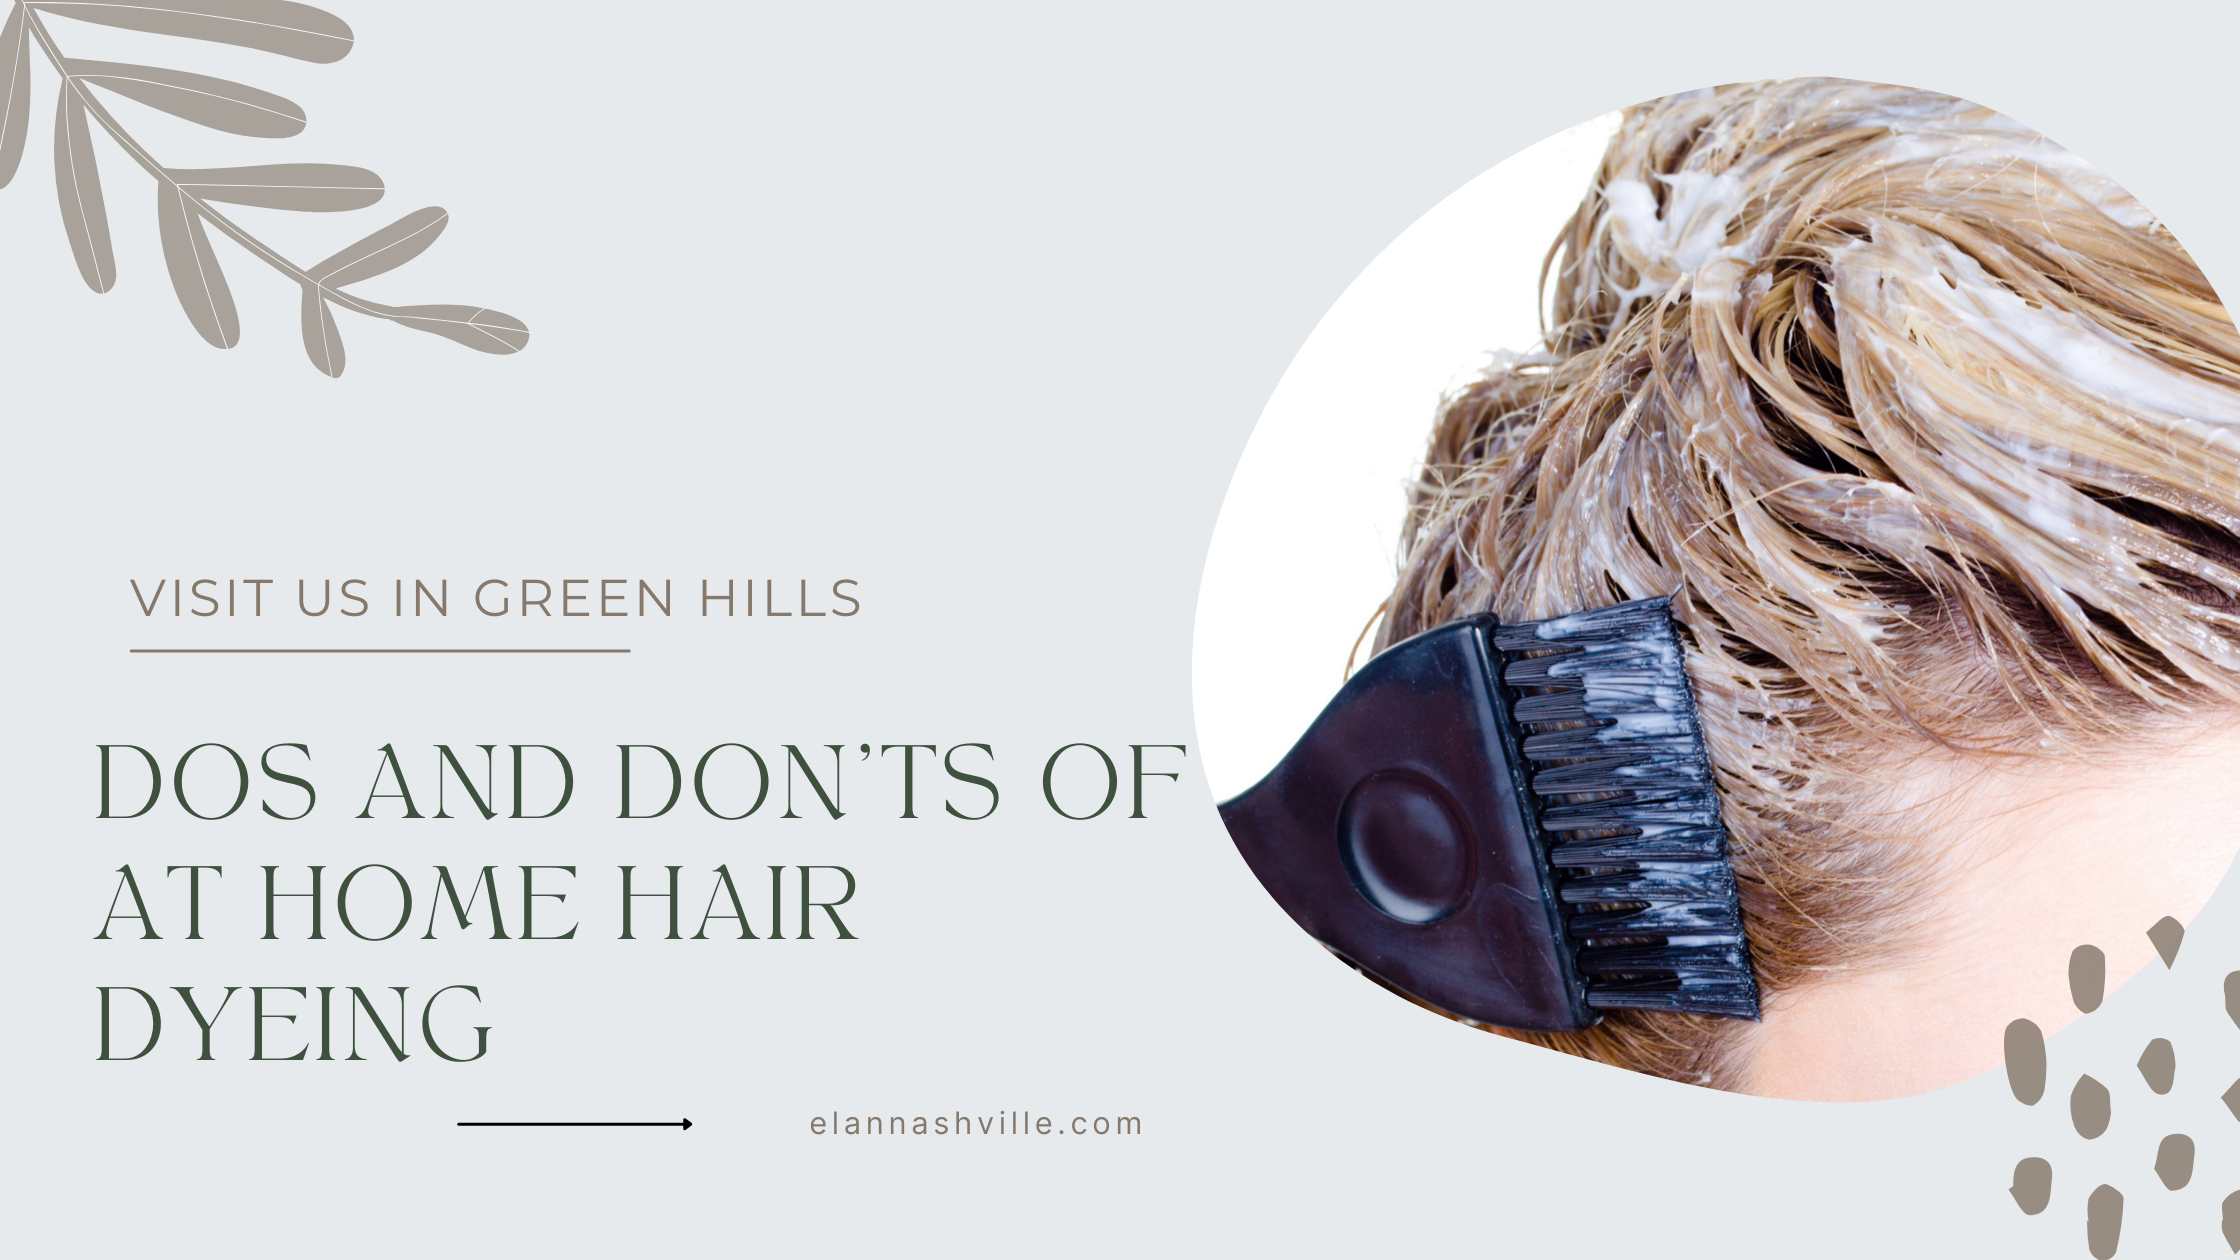 5. "The Dos and Don'ts of Dyeing Your Hair Blond as a Man" - wide 1